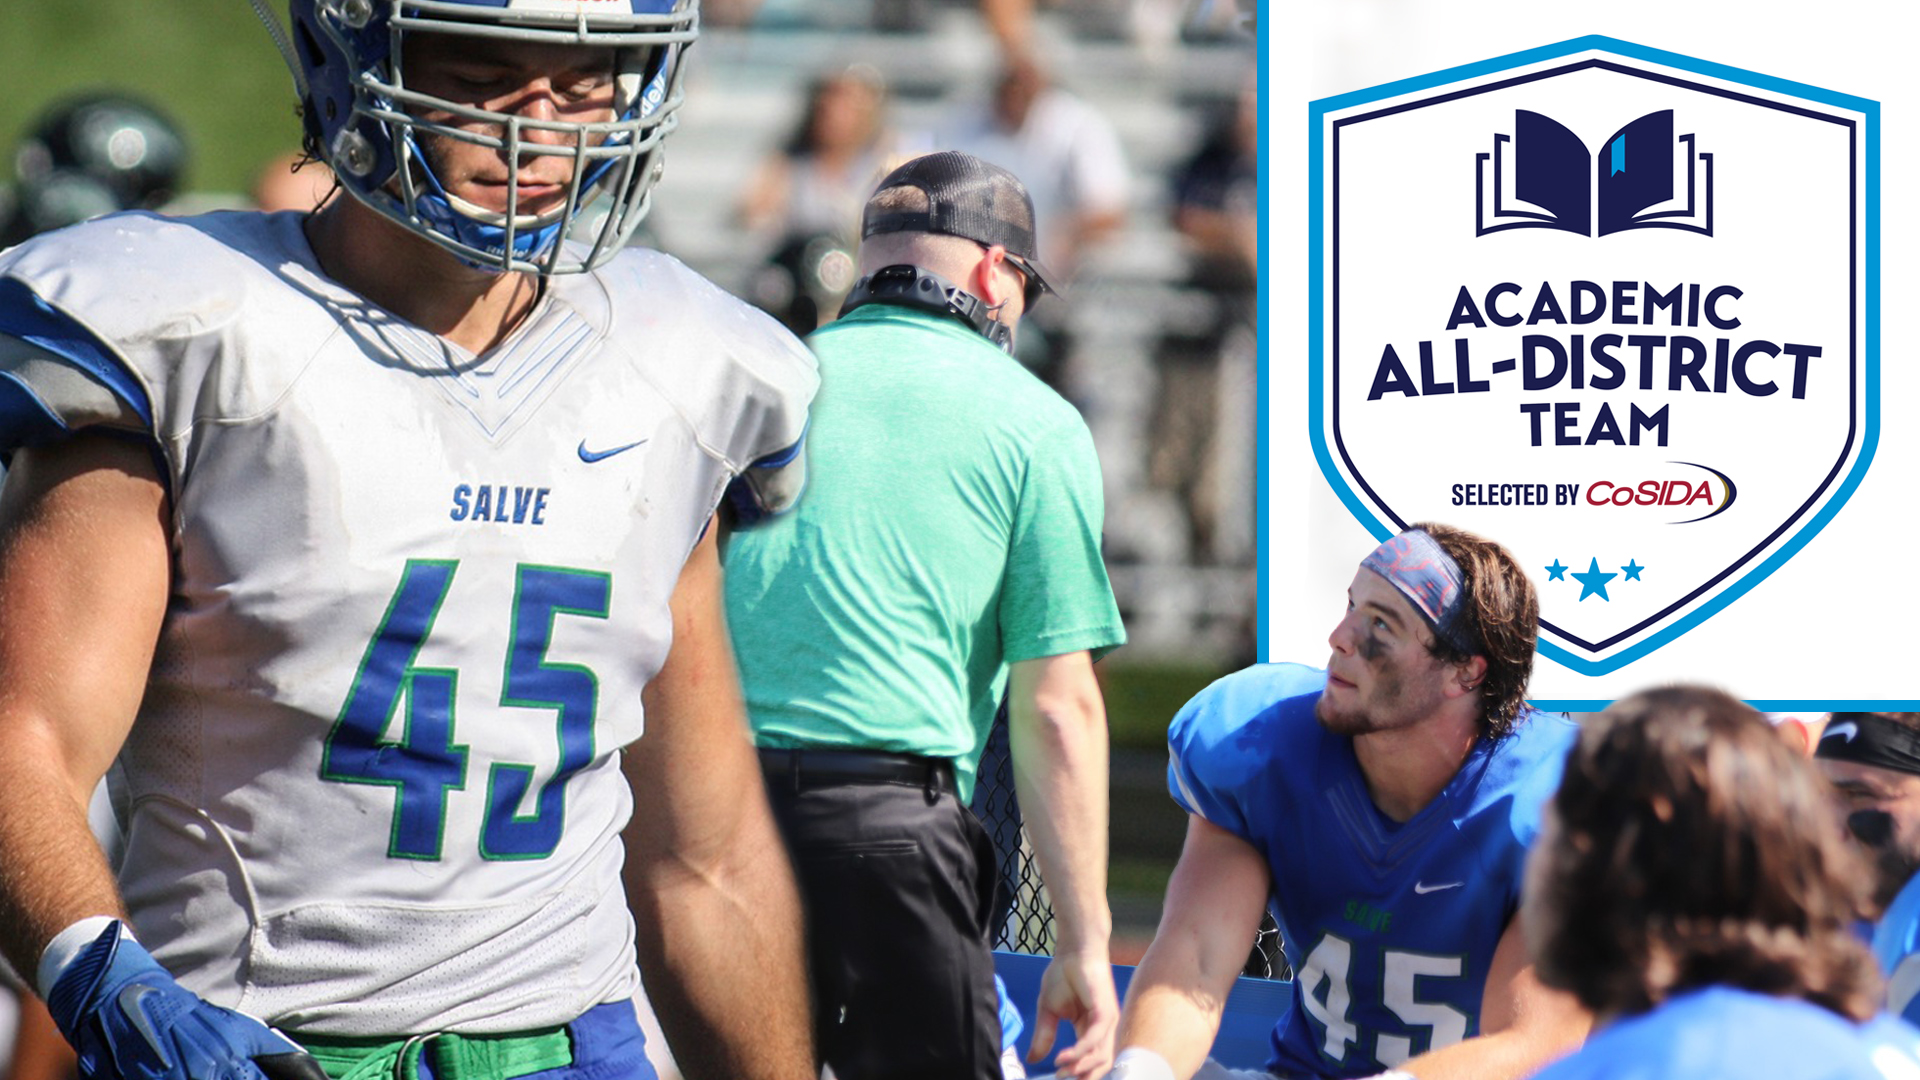 Home and away, on the field and in the classroom, Matt Messner has been a top performer for Salve Regina football.